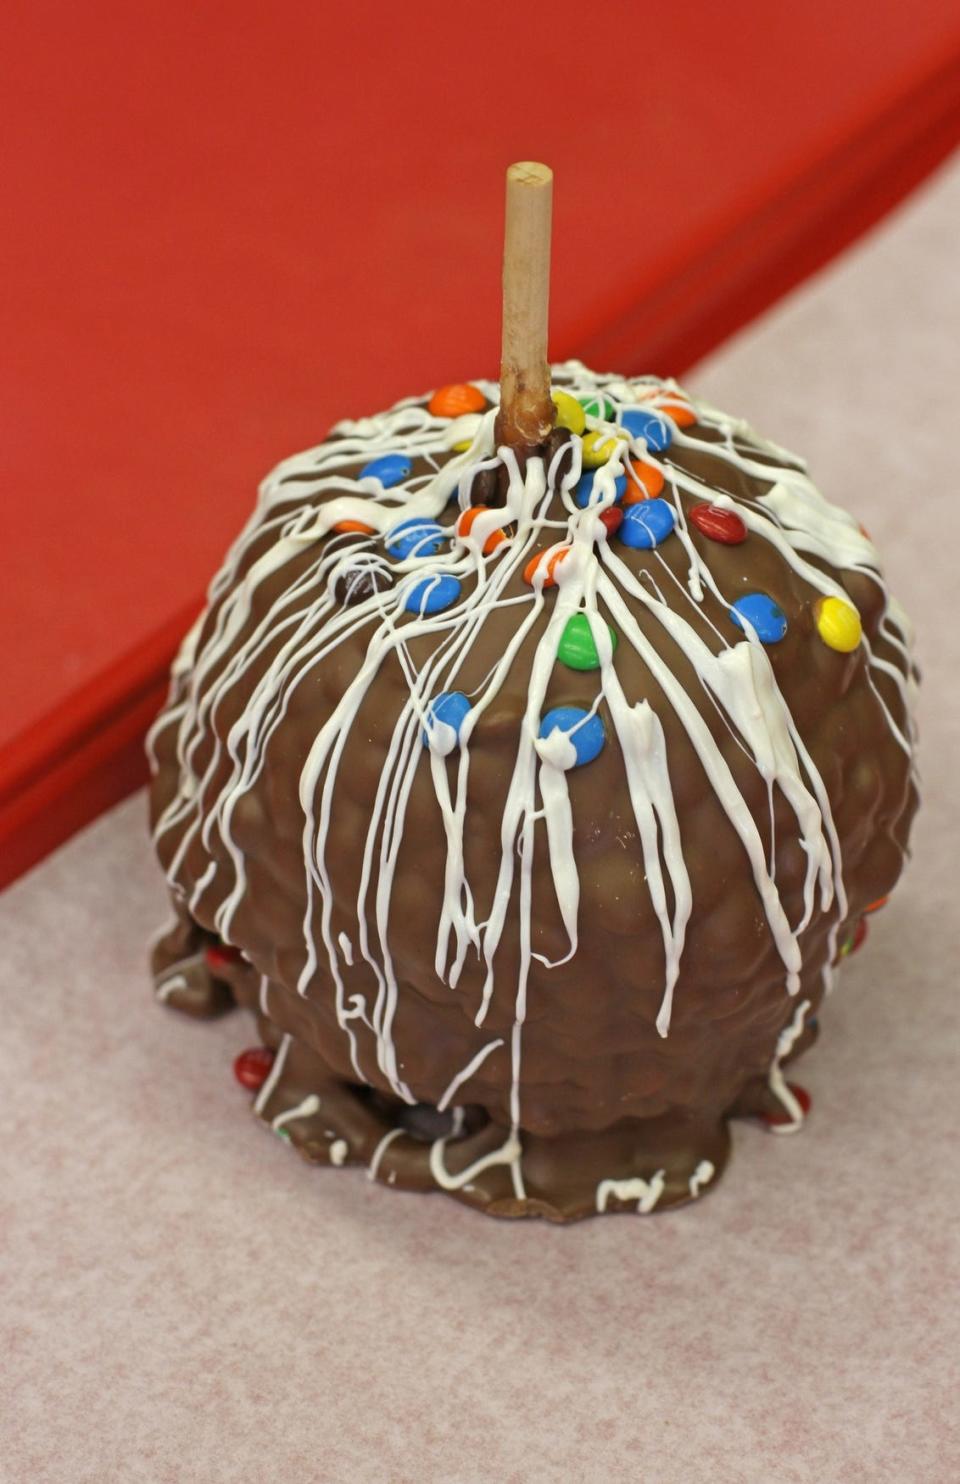 Jaswell Farm in Smithfield is the stop for not just produce but also their gigantic gourmet apples covered in chocolate and caramel.